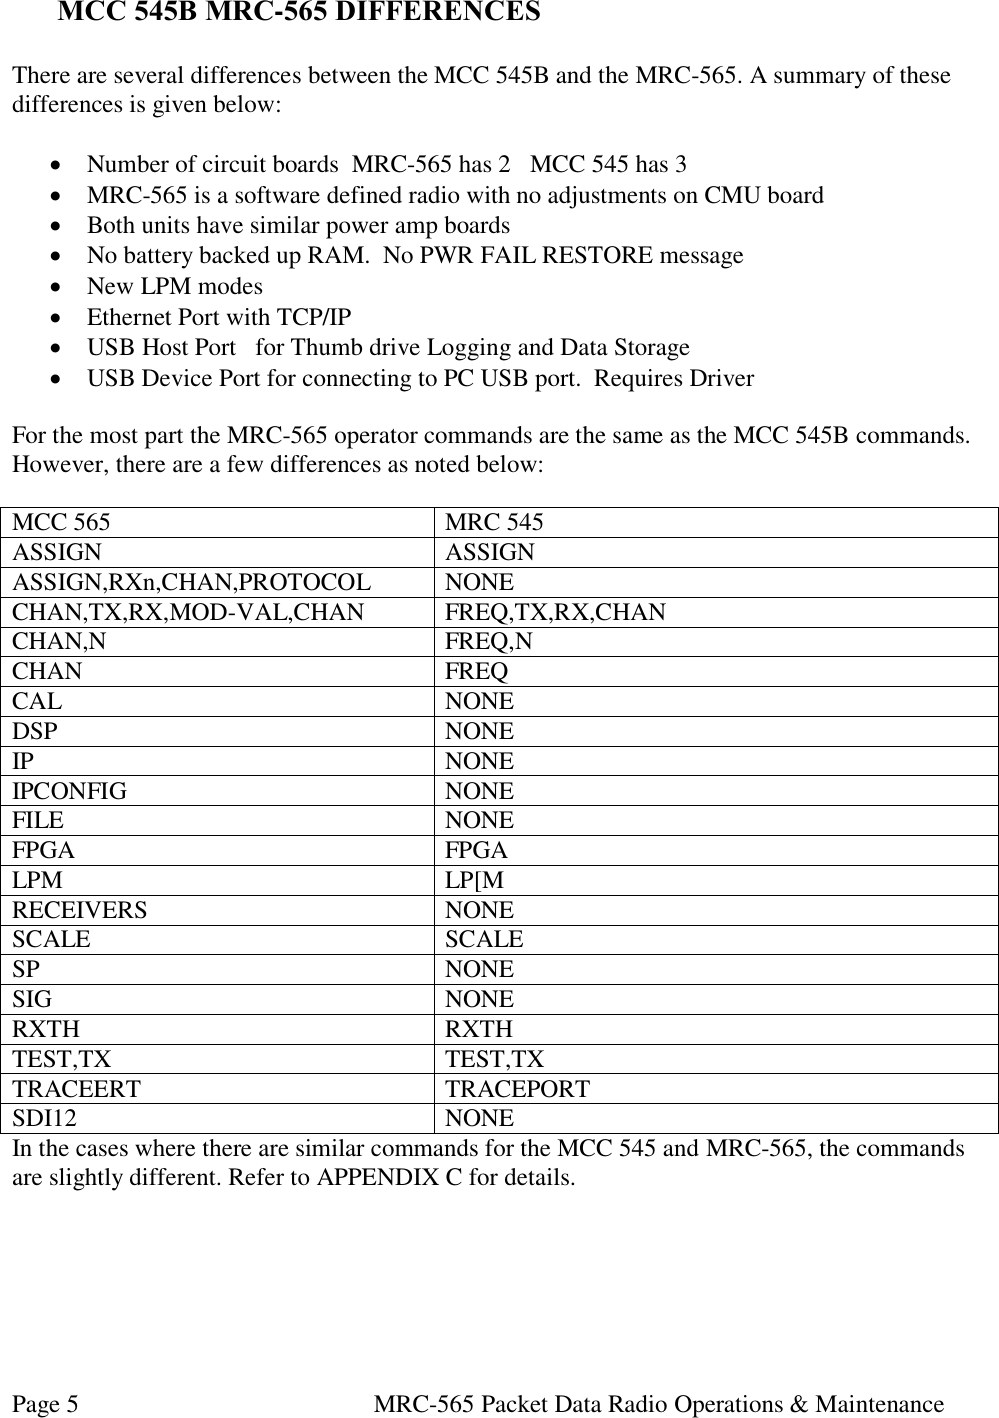 Page 5  MRC-565 Packet Data Radio Operations &amp; Maintenance MCC 545B MRC-565 DIFFERENCES  There are several differences between the MCC 545B and the MRC-565. A summary of these differences is given below:   Number of circuit boards  MRC-565 has 2   MCC 545 has 3  MRC-565 is a software defined radio with no adjustments on CMU board  Both units have similar power amp boards  No battery backed up RAM.  No PWR FAIL RESTORE message  New LPM modes  Ethernet Port with TCP/IP  USB Host Port   for Thumb drive Logging and Data Storage  USB Device Port for connecting to PC USB port.  Requires Driver  For the most part the MRC-565 operator commands are the same as the MCC 545B commands.  However, there are a few differences as noted below:  MCC 565  MRC 545 ASSIGN ASSIGN ASSIGN,RXn,CHAN,PROTOCOL NONE CHAN,TX,RX,MOD-VAL,CHAN FREQ,TX,RX,CHAN CHAN,N FREQ,N CHAN FREQ CAL  NONE DSP NONE IP NONE IPCONFIG NONE FILE NONE FPGA   FPGA LPM LP[M RECEIVERS NONE SCALE SCALE SP NONE SIG NONE RXTH RXTH TEST,TX TEST,TX TRACEERT TRACEPORT SDI12 NONE In the cases where there are similar commands for the MCC 545 and MRC-565, the commands are slightly different. Refer to APPENDIX C for details.      